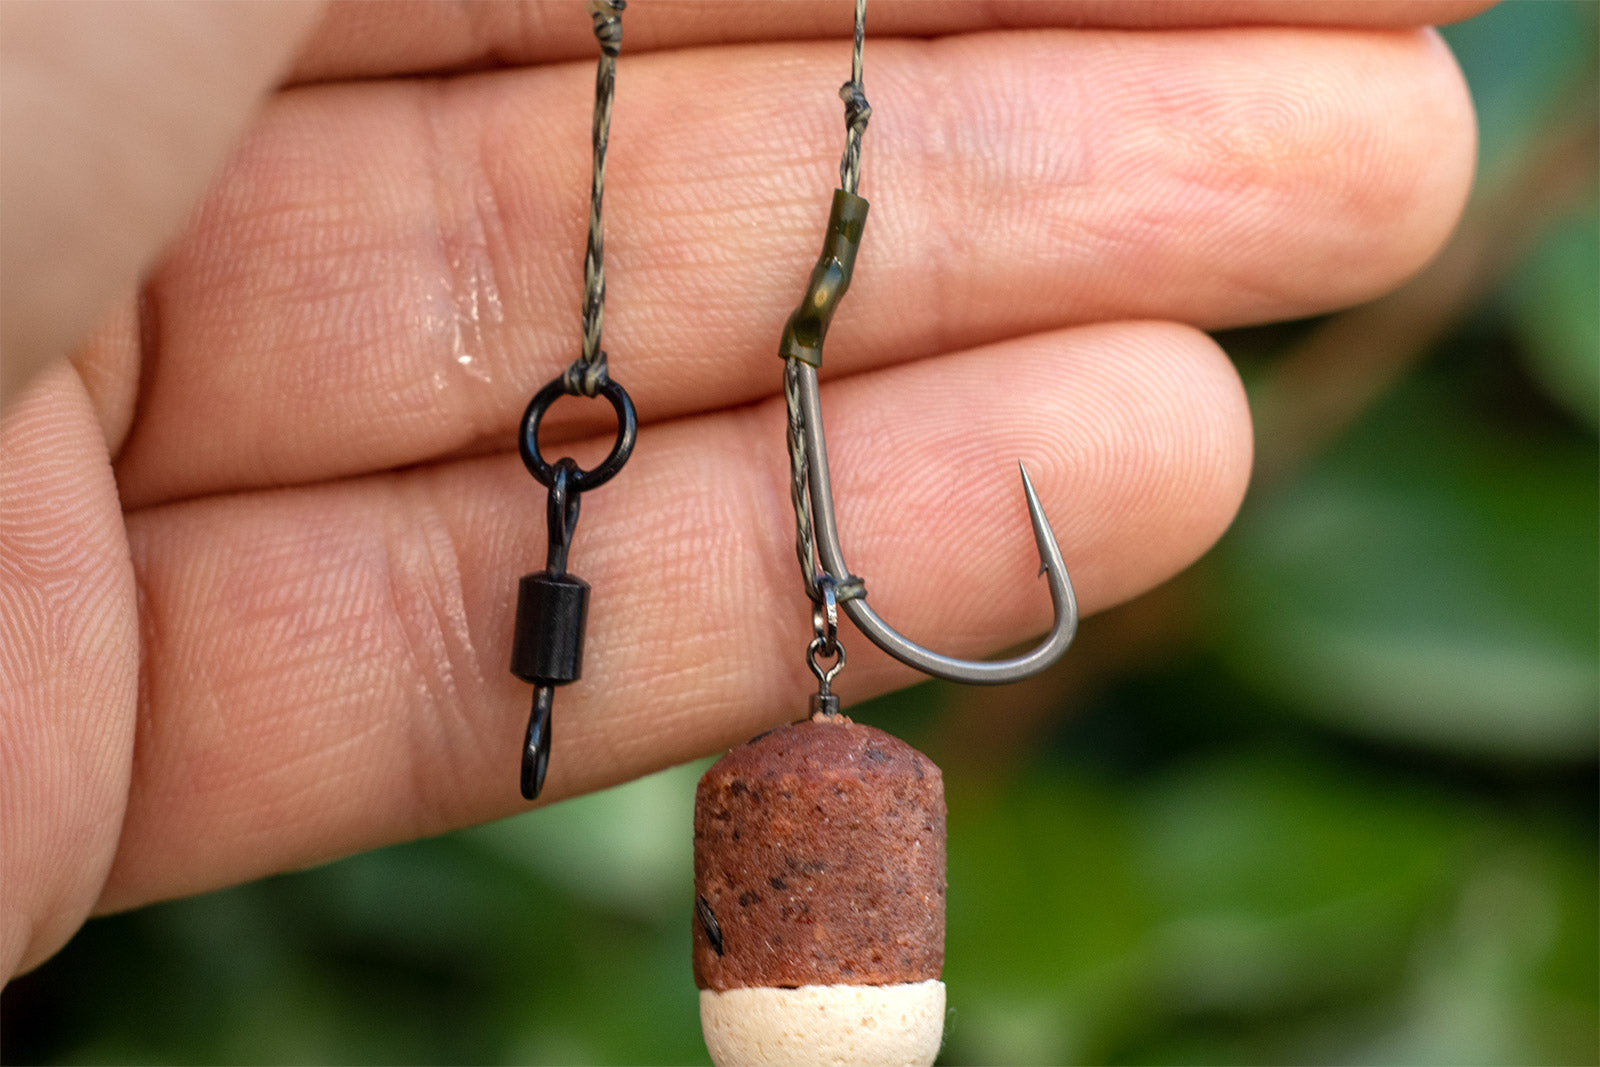 Tufflex Camo supple braid used for a Short Pva bag rig. A Multi rig, using a size 4 Duropoint Anchor Carp hook, Micro hook ring swivel and Size 8 Flexi Rign Swivel. The hook bait is a critically balanced using a trimmed down boilie tipped with half of a small white popup.